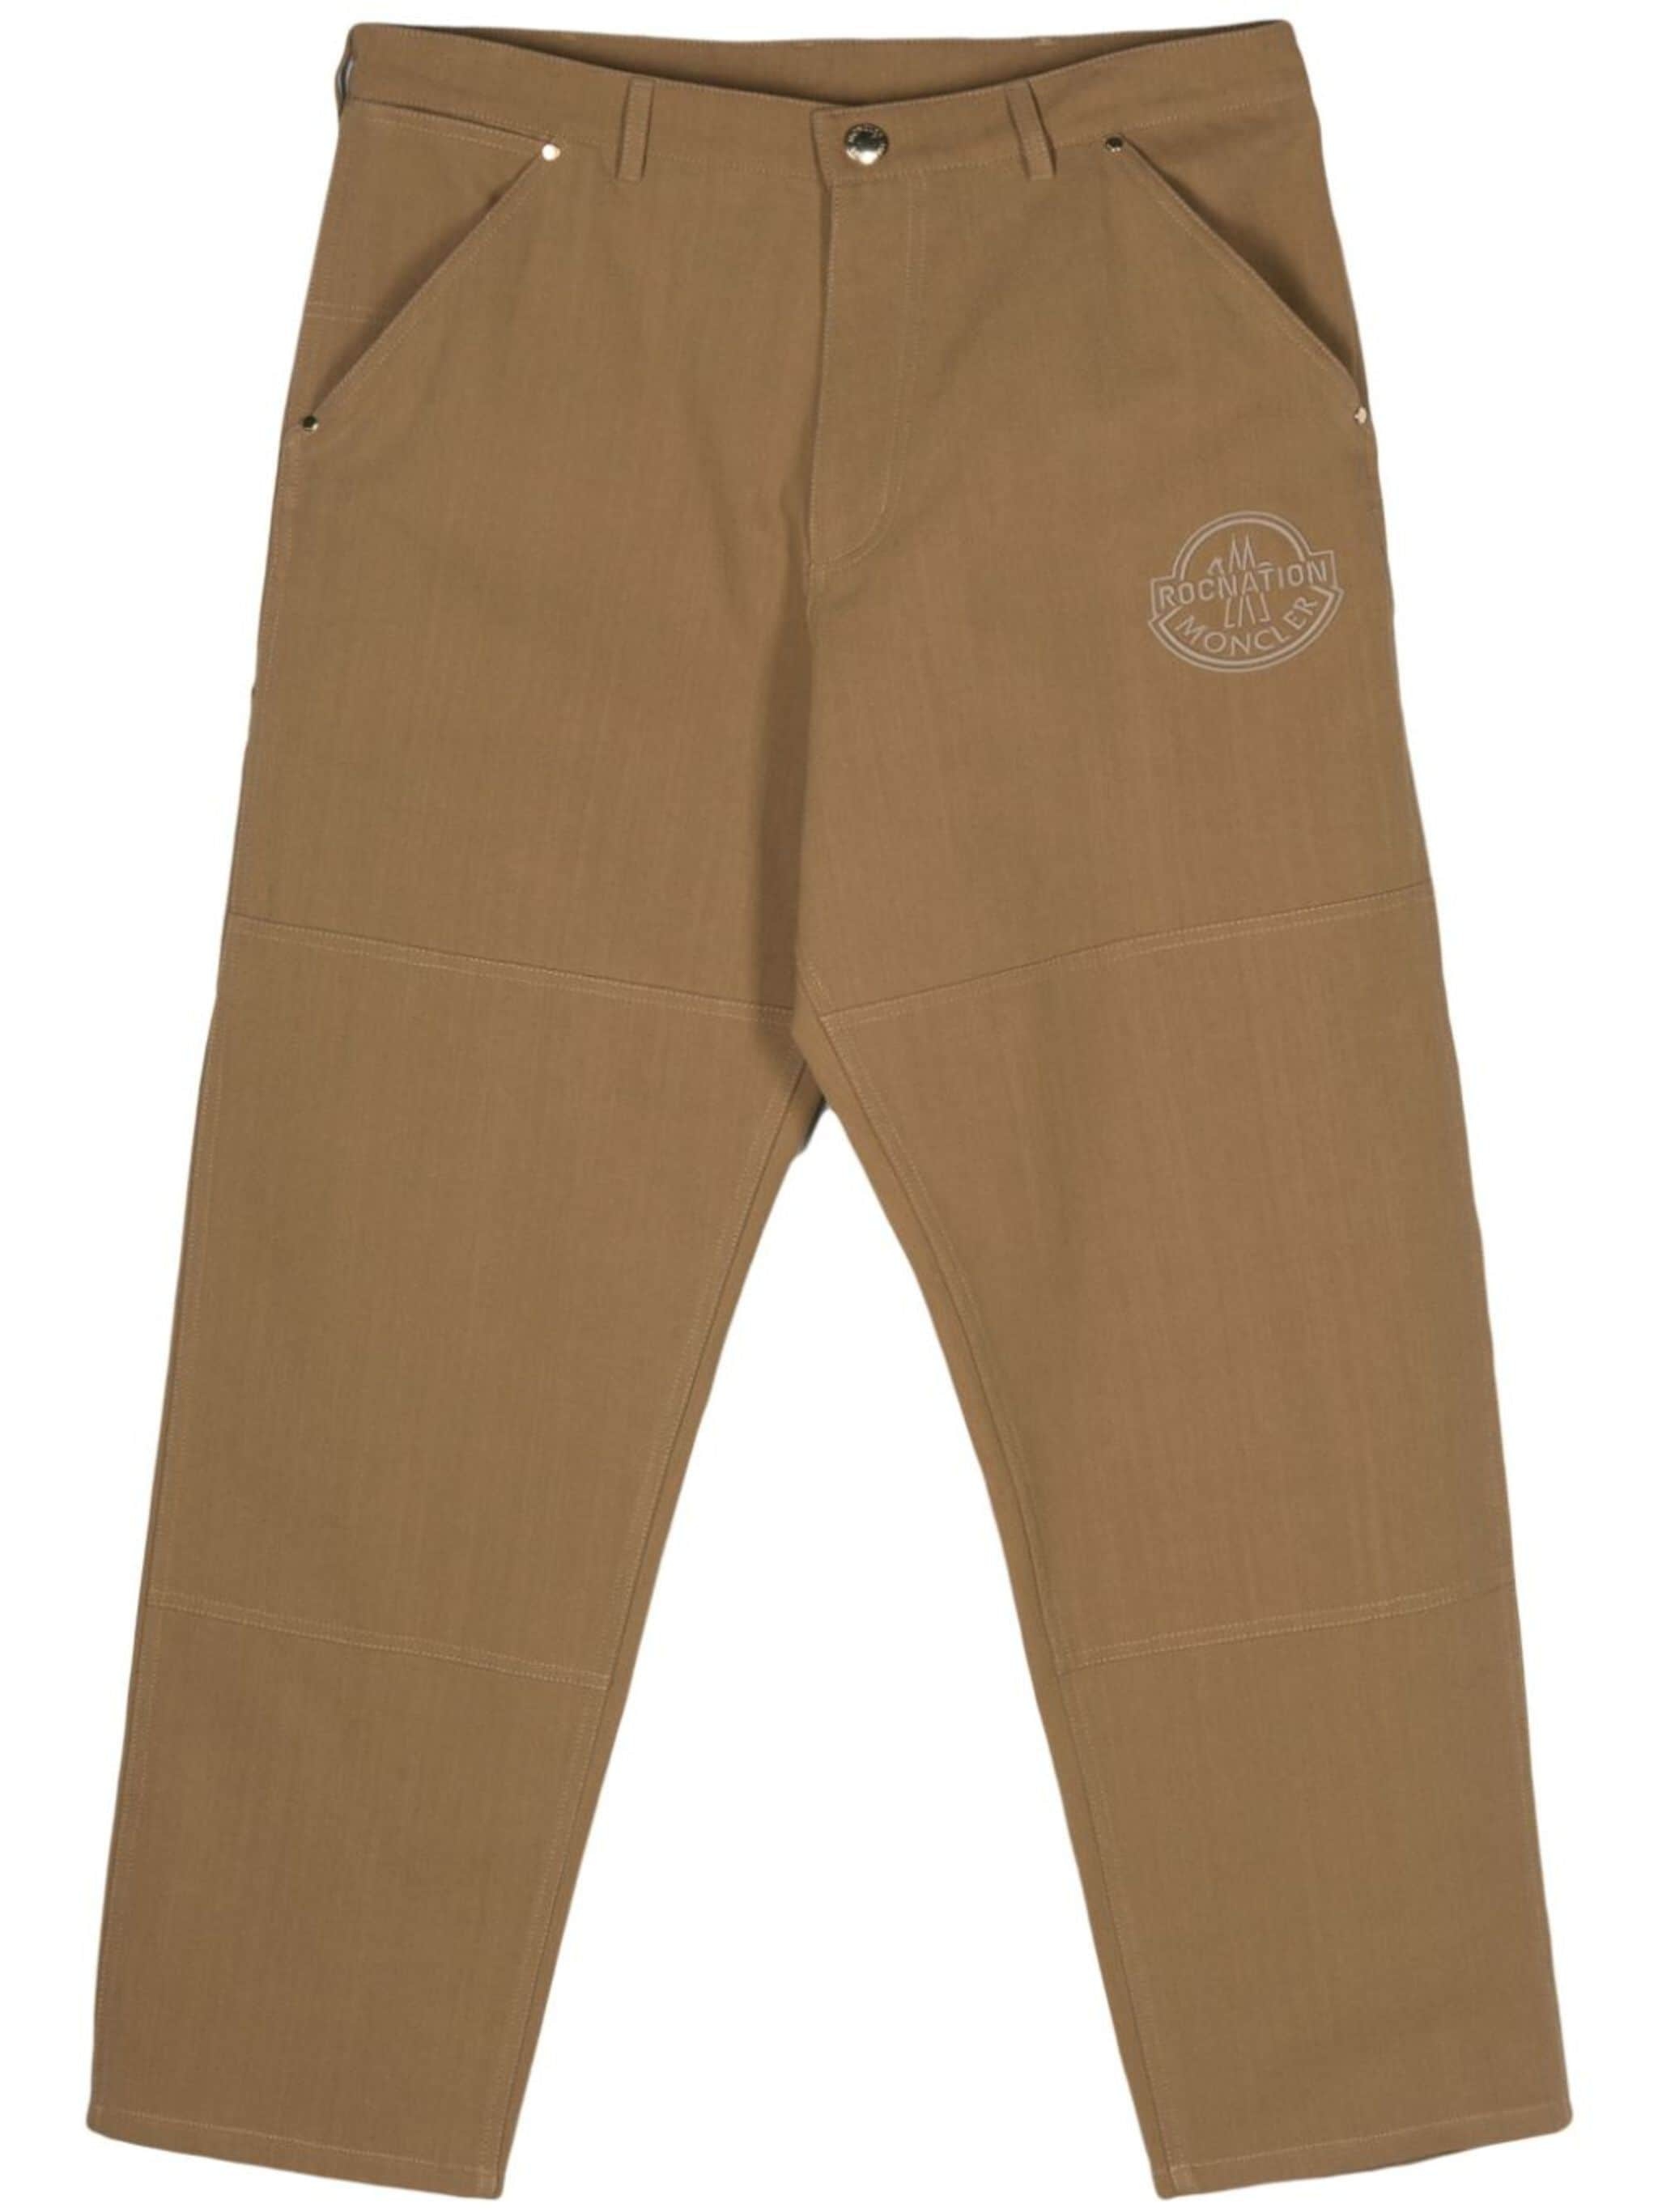 x Roc Nation by Jay Z trousers - 1